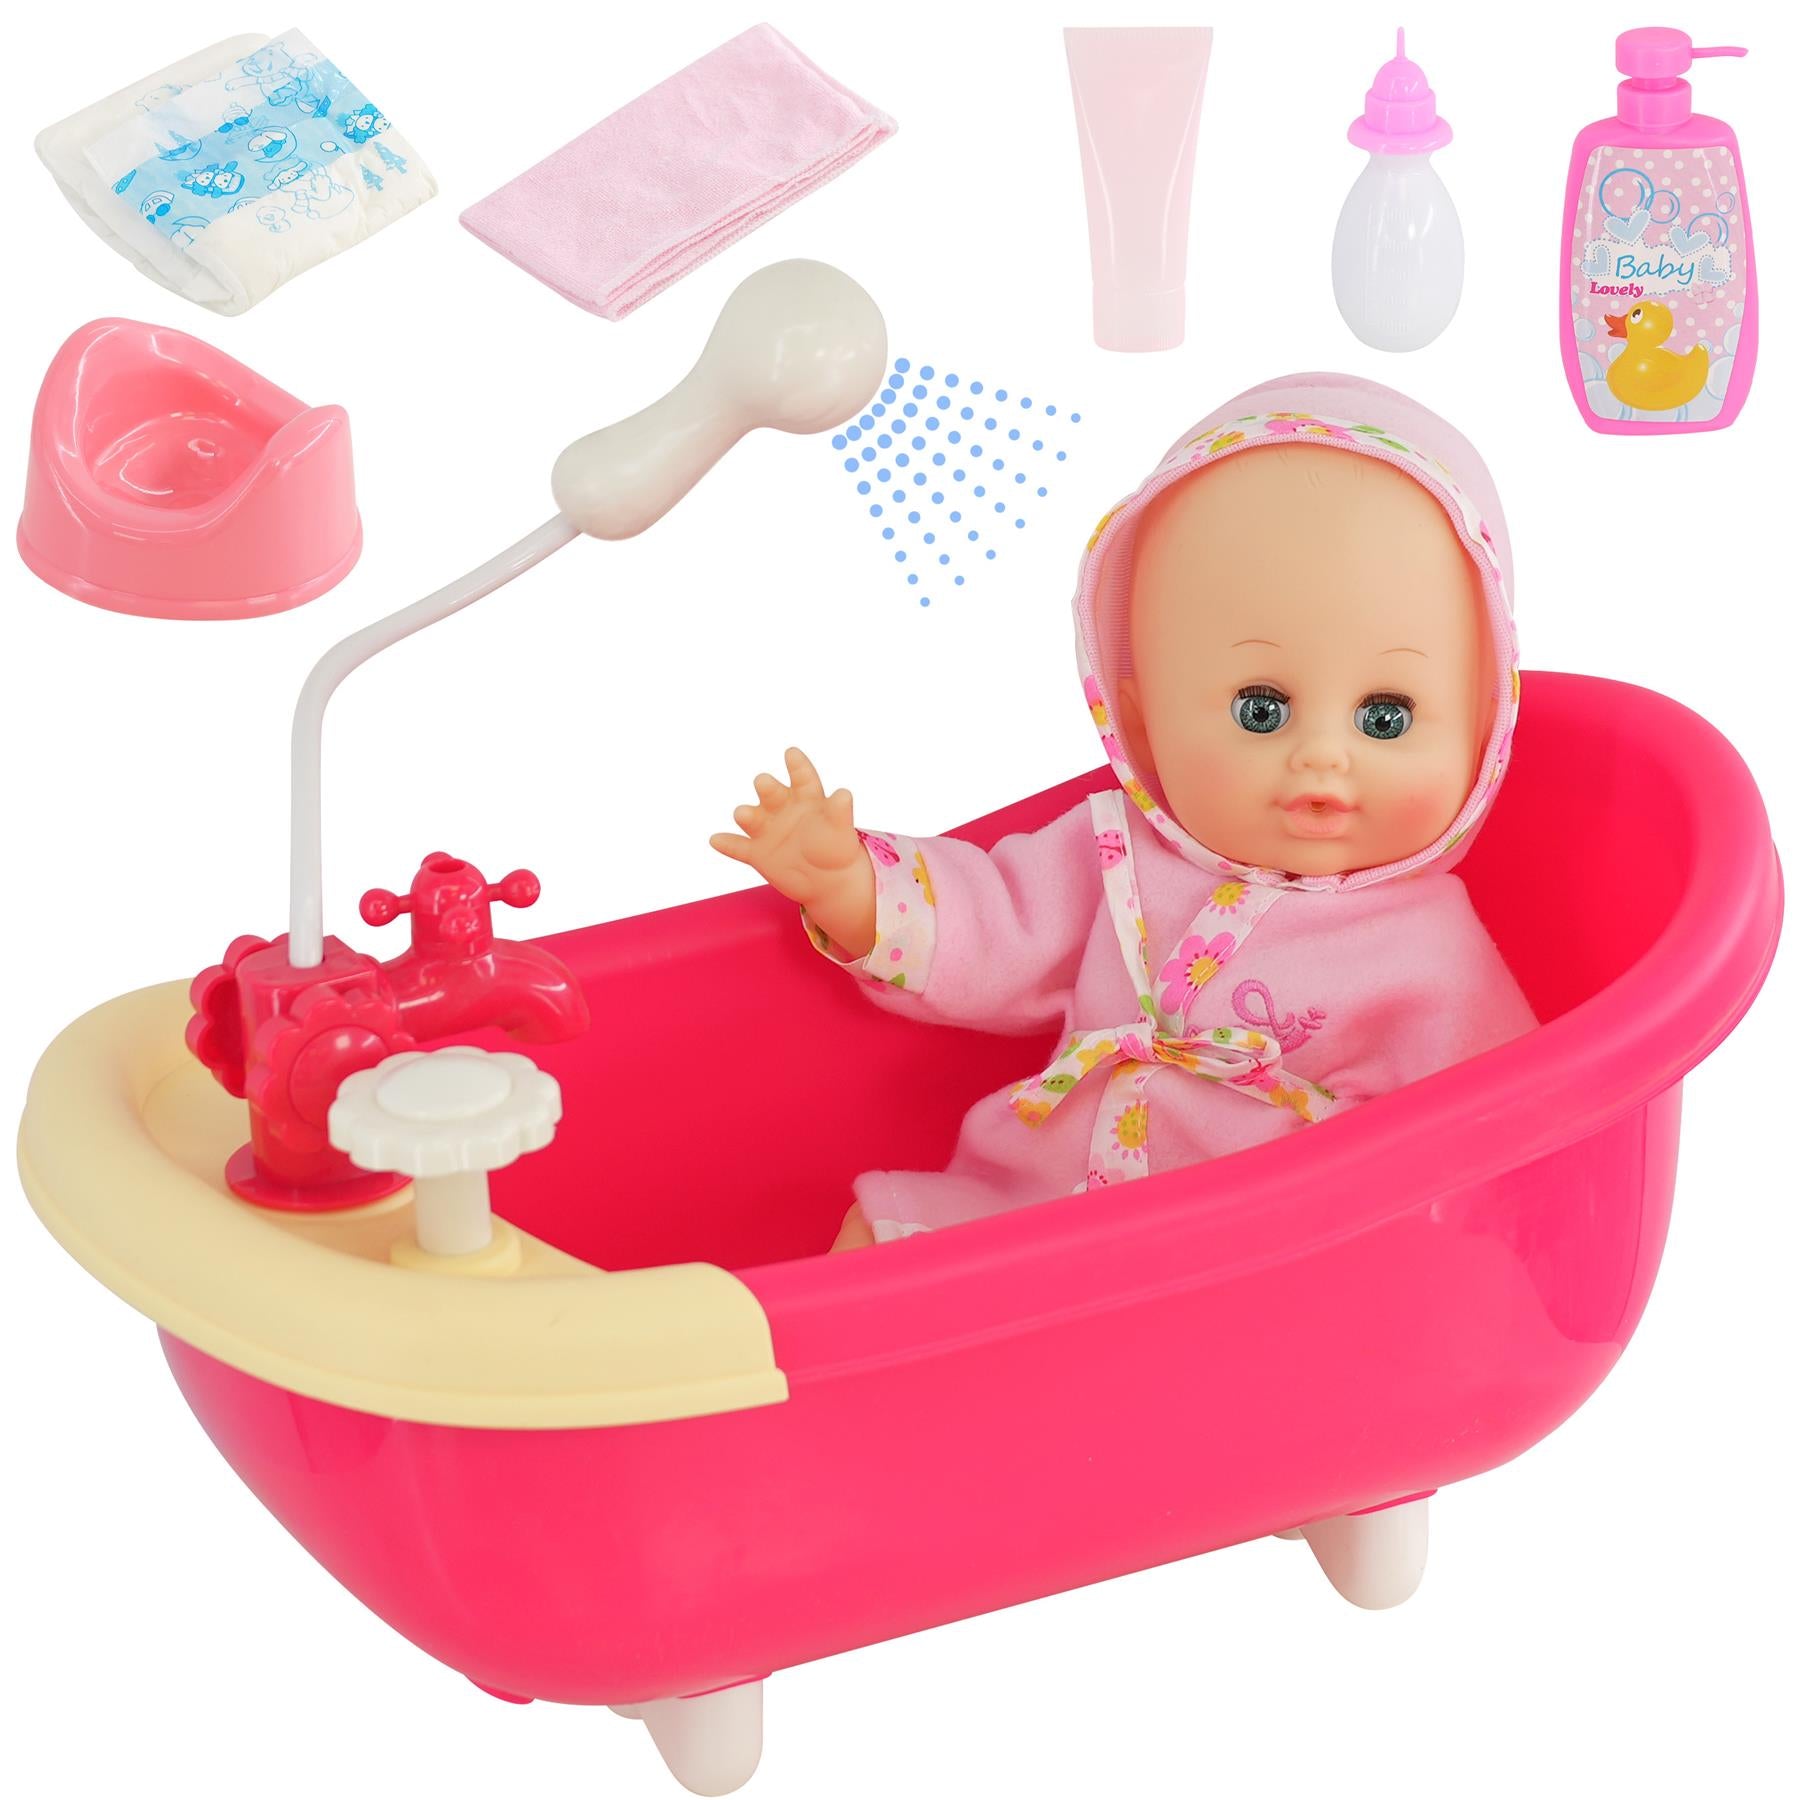 Doll and Bath set with Accessories by BiBi Doll - The Magic Toy Shop